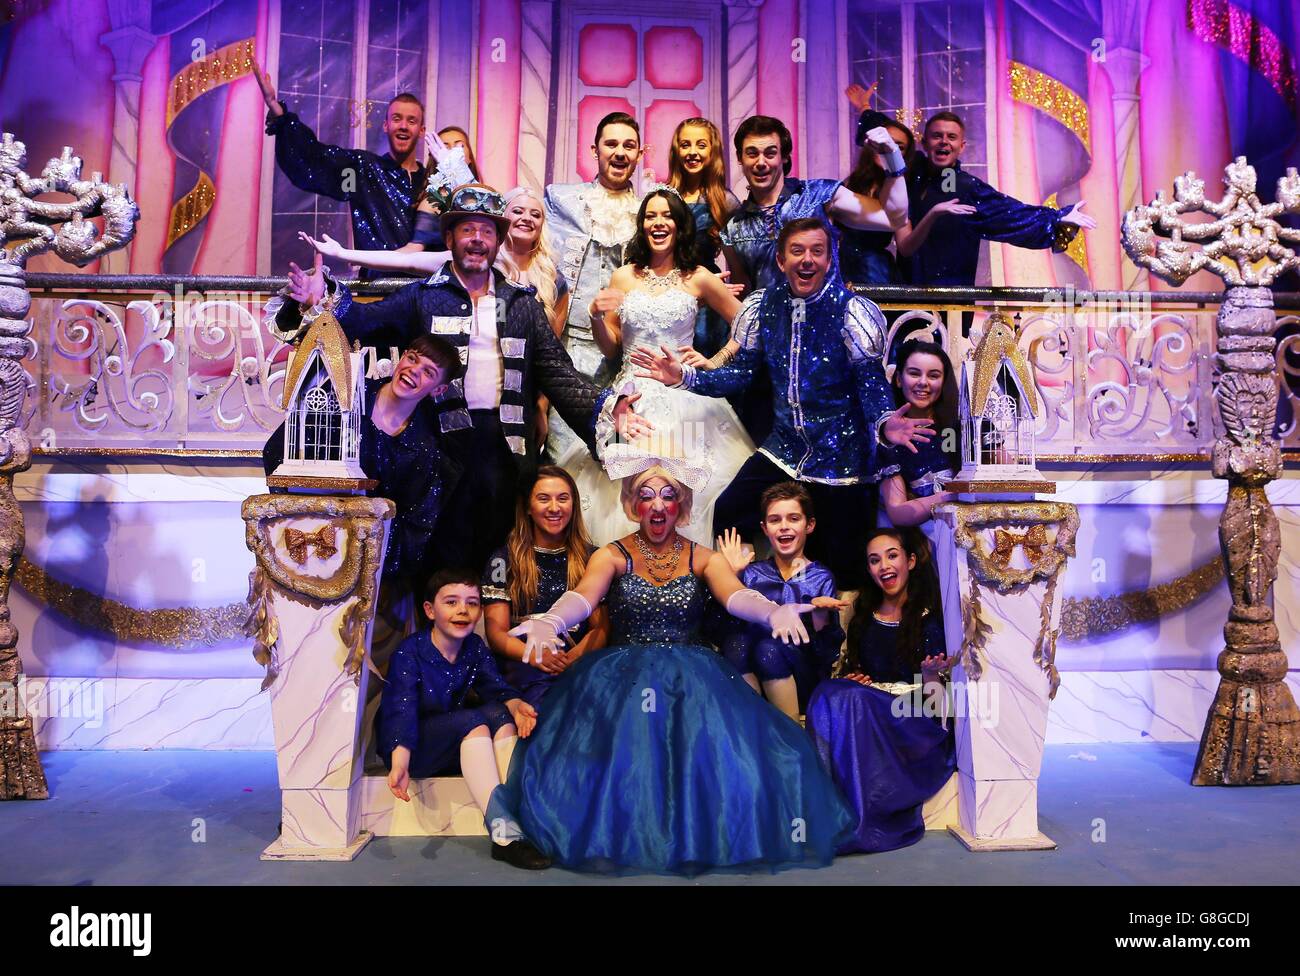 The Cast Of Beauty And The Beast Panto Pose For Photos At The Launch At The Tivoli Theatre In Dublin Stock Photo Alamy